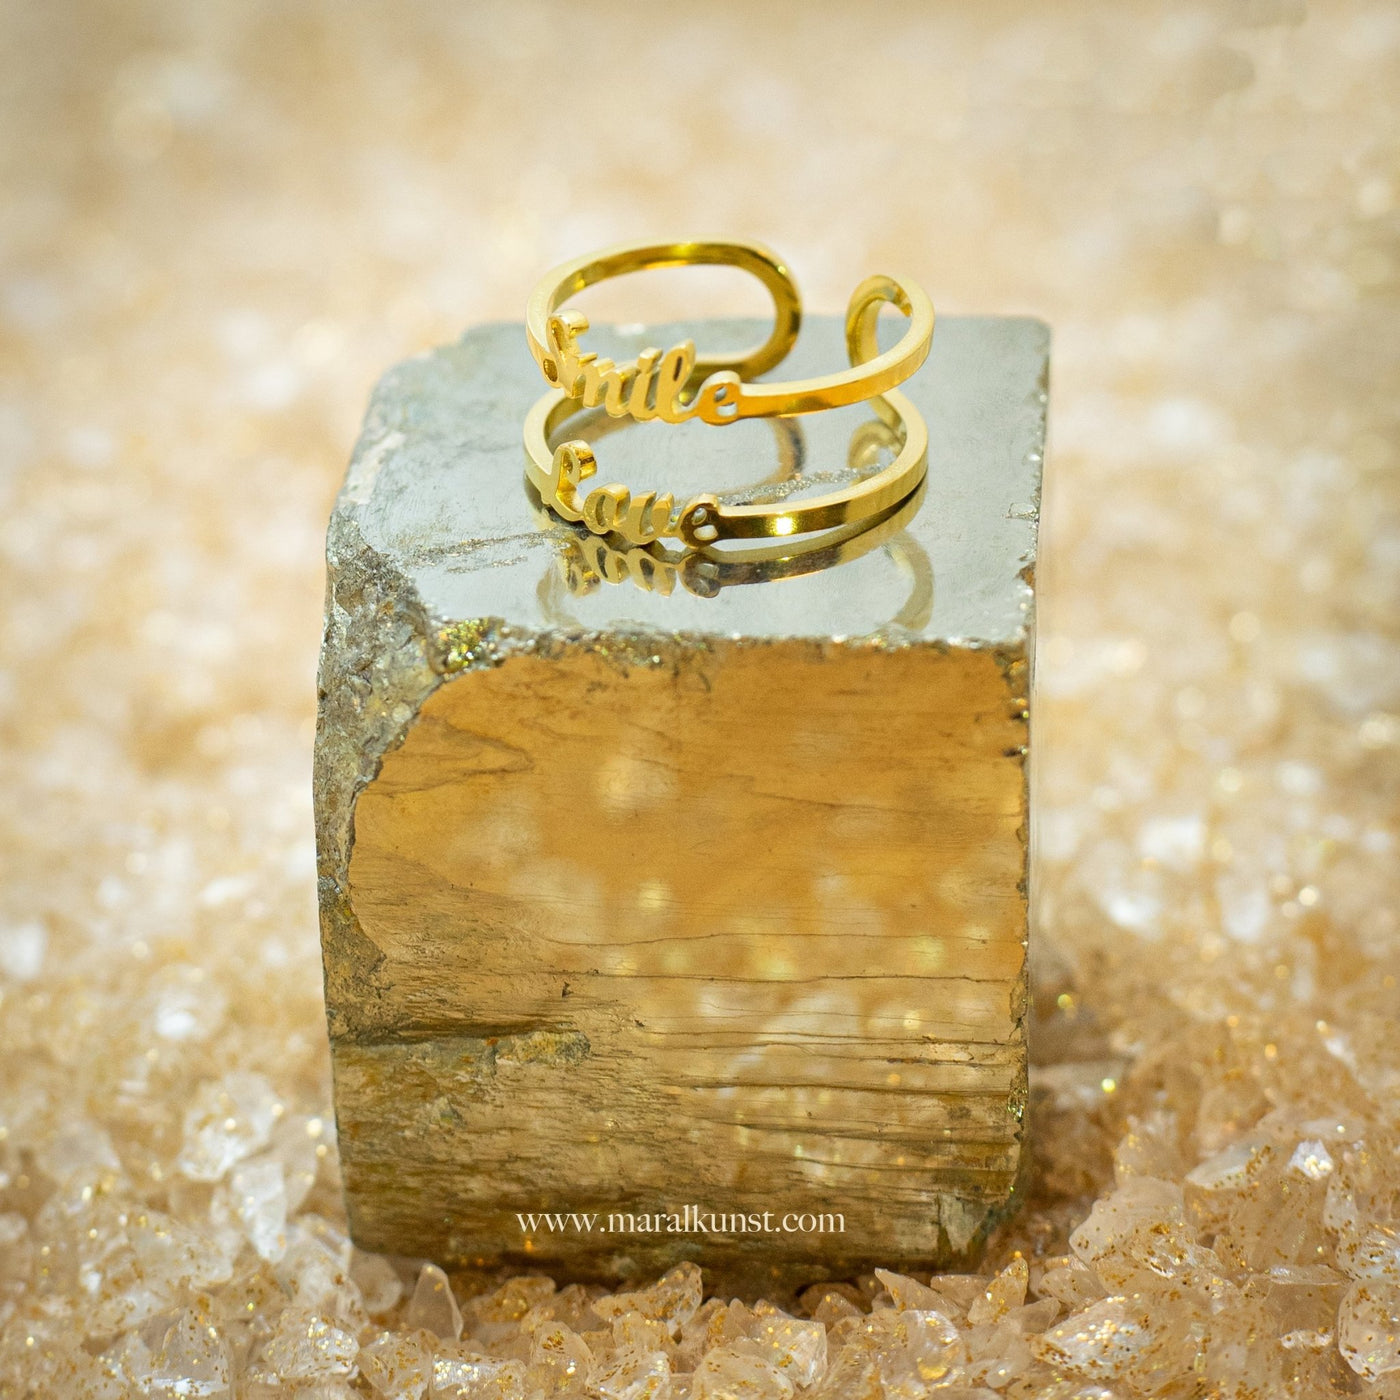 Smile Love Ring - Maral Kunst Jewelry